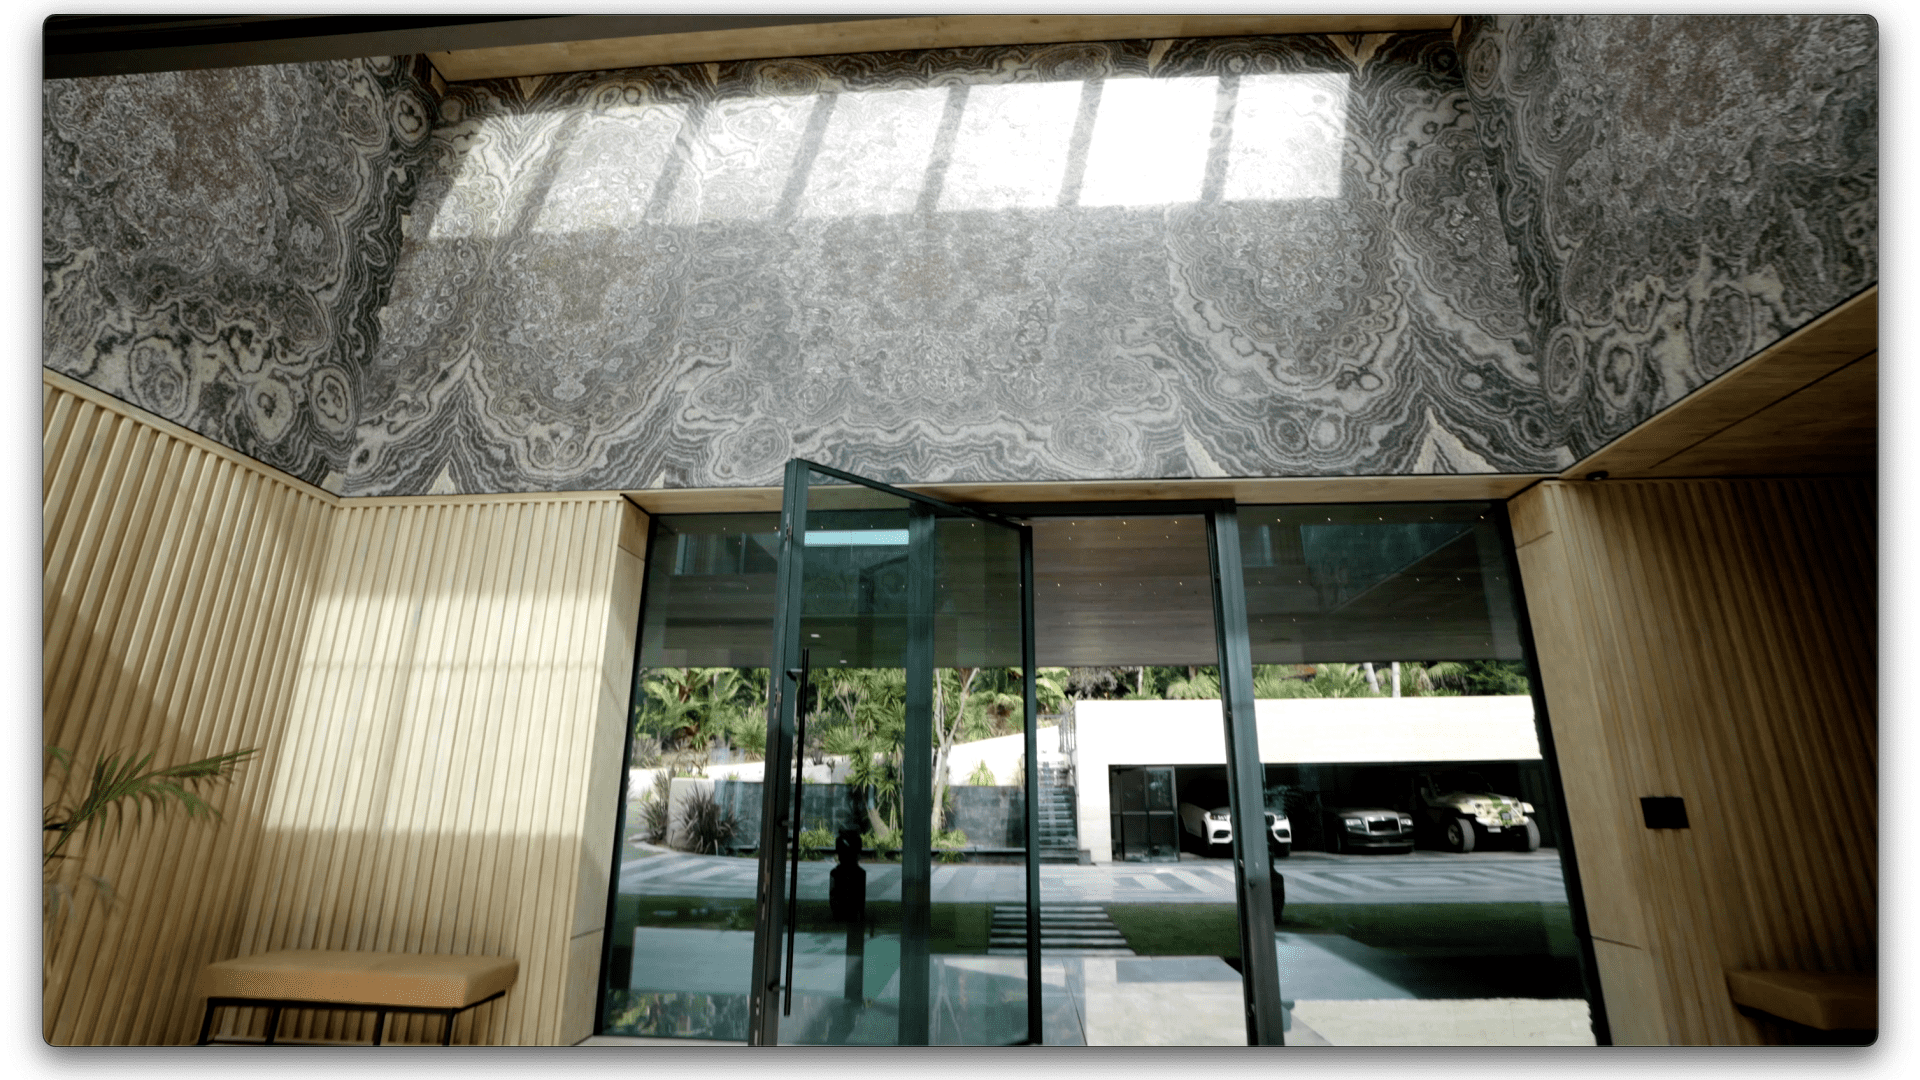 The upper half of the foyer's 25-foot walls are clad in onyx imported from Asia.